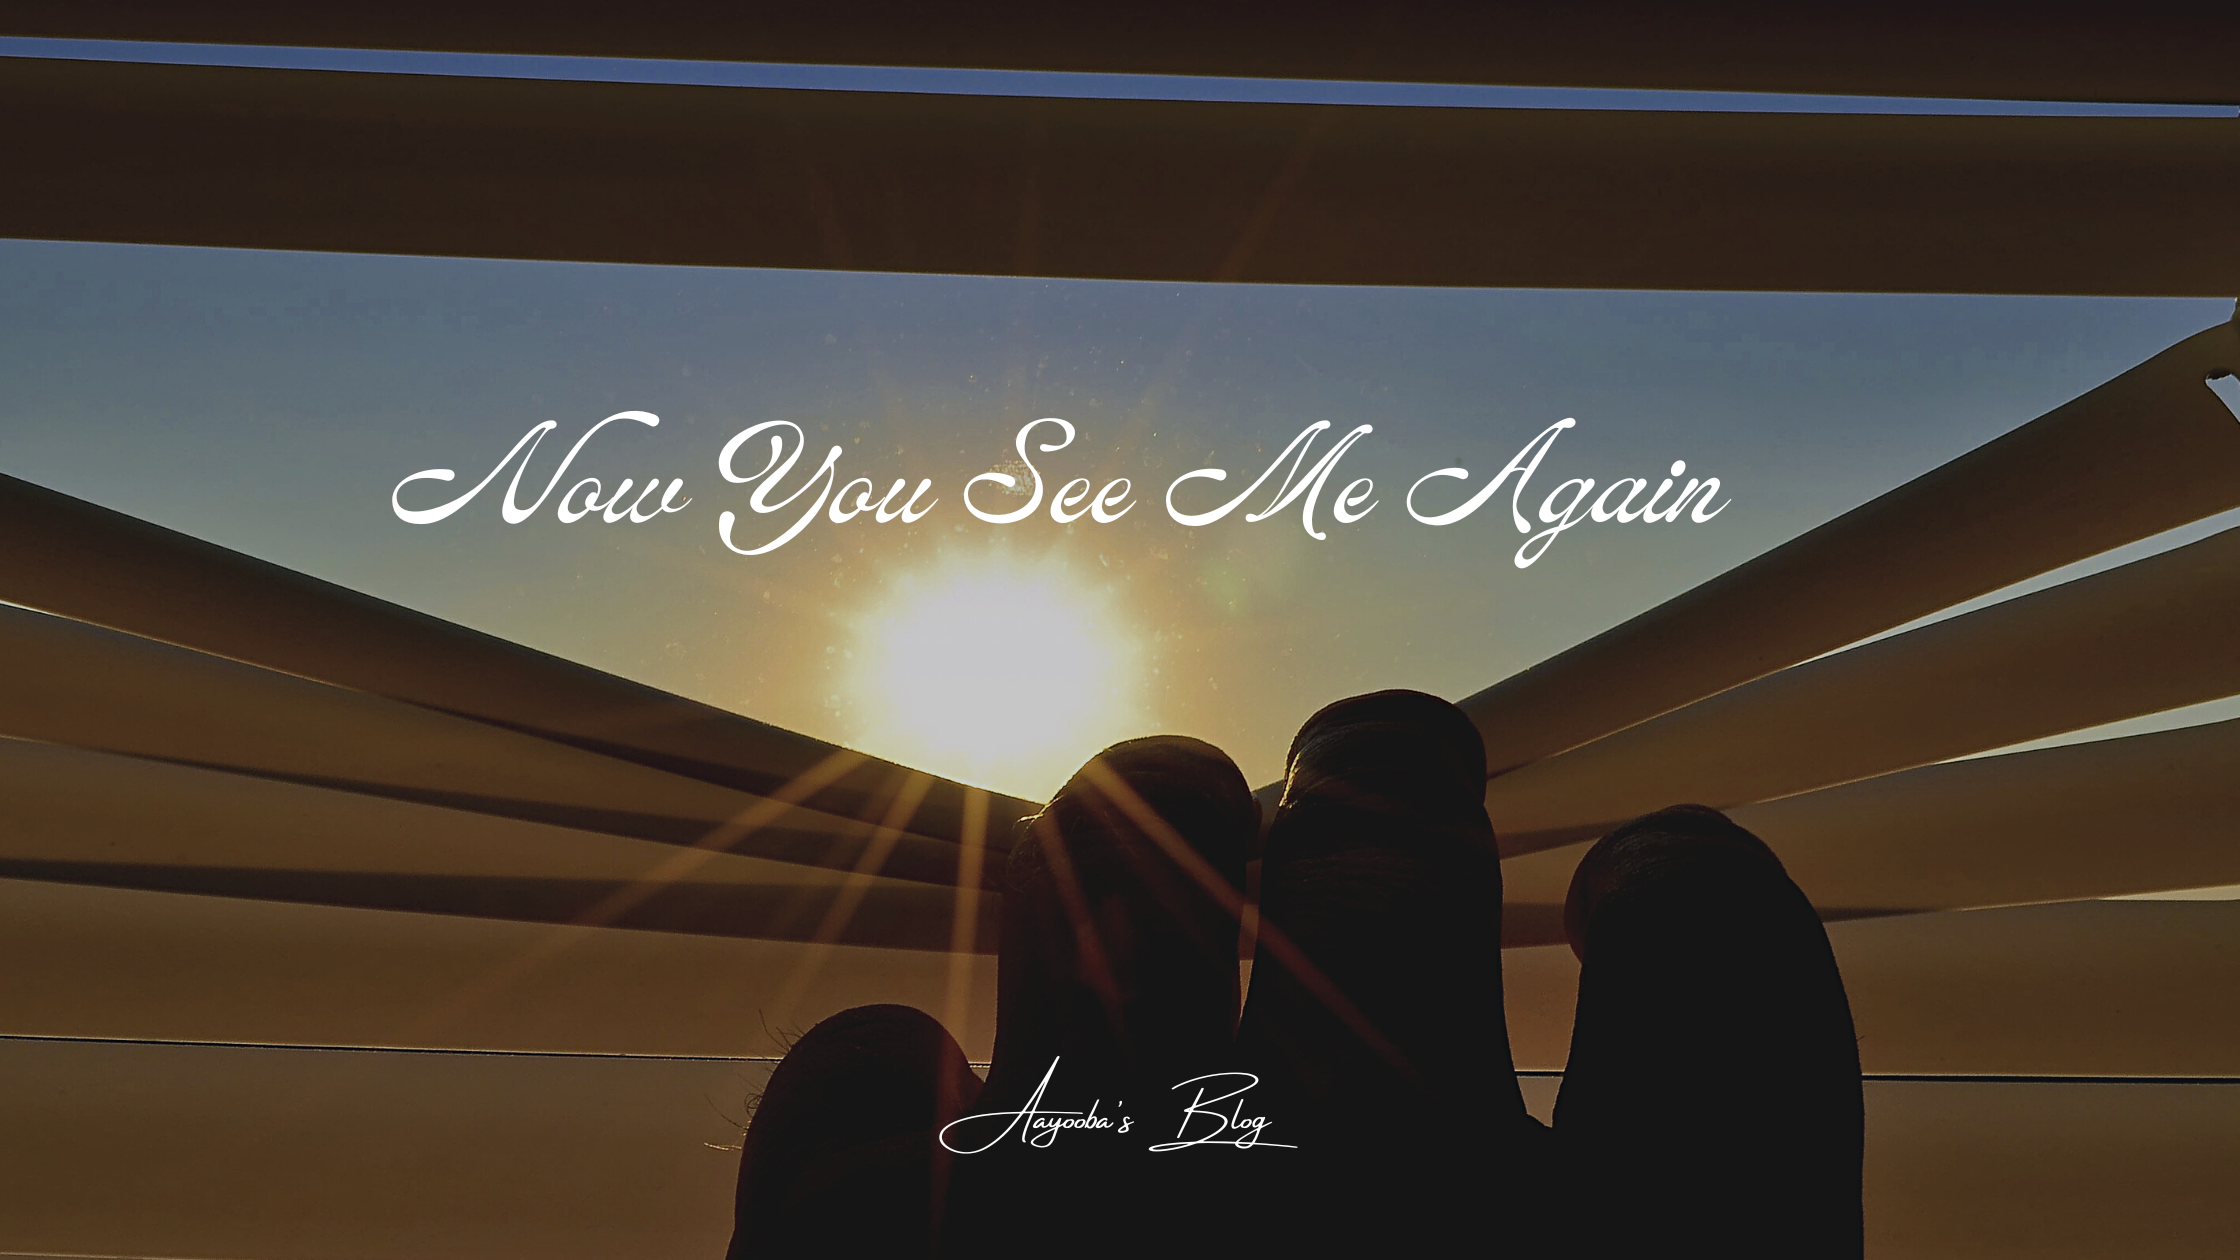 blog banner for post "now you see me again" for Aayooba's blog